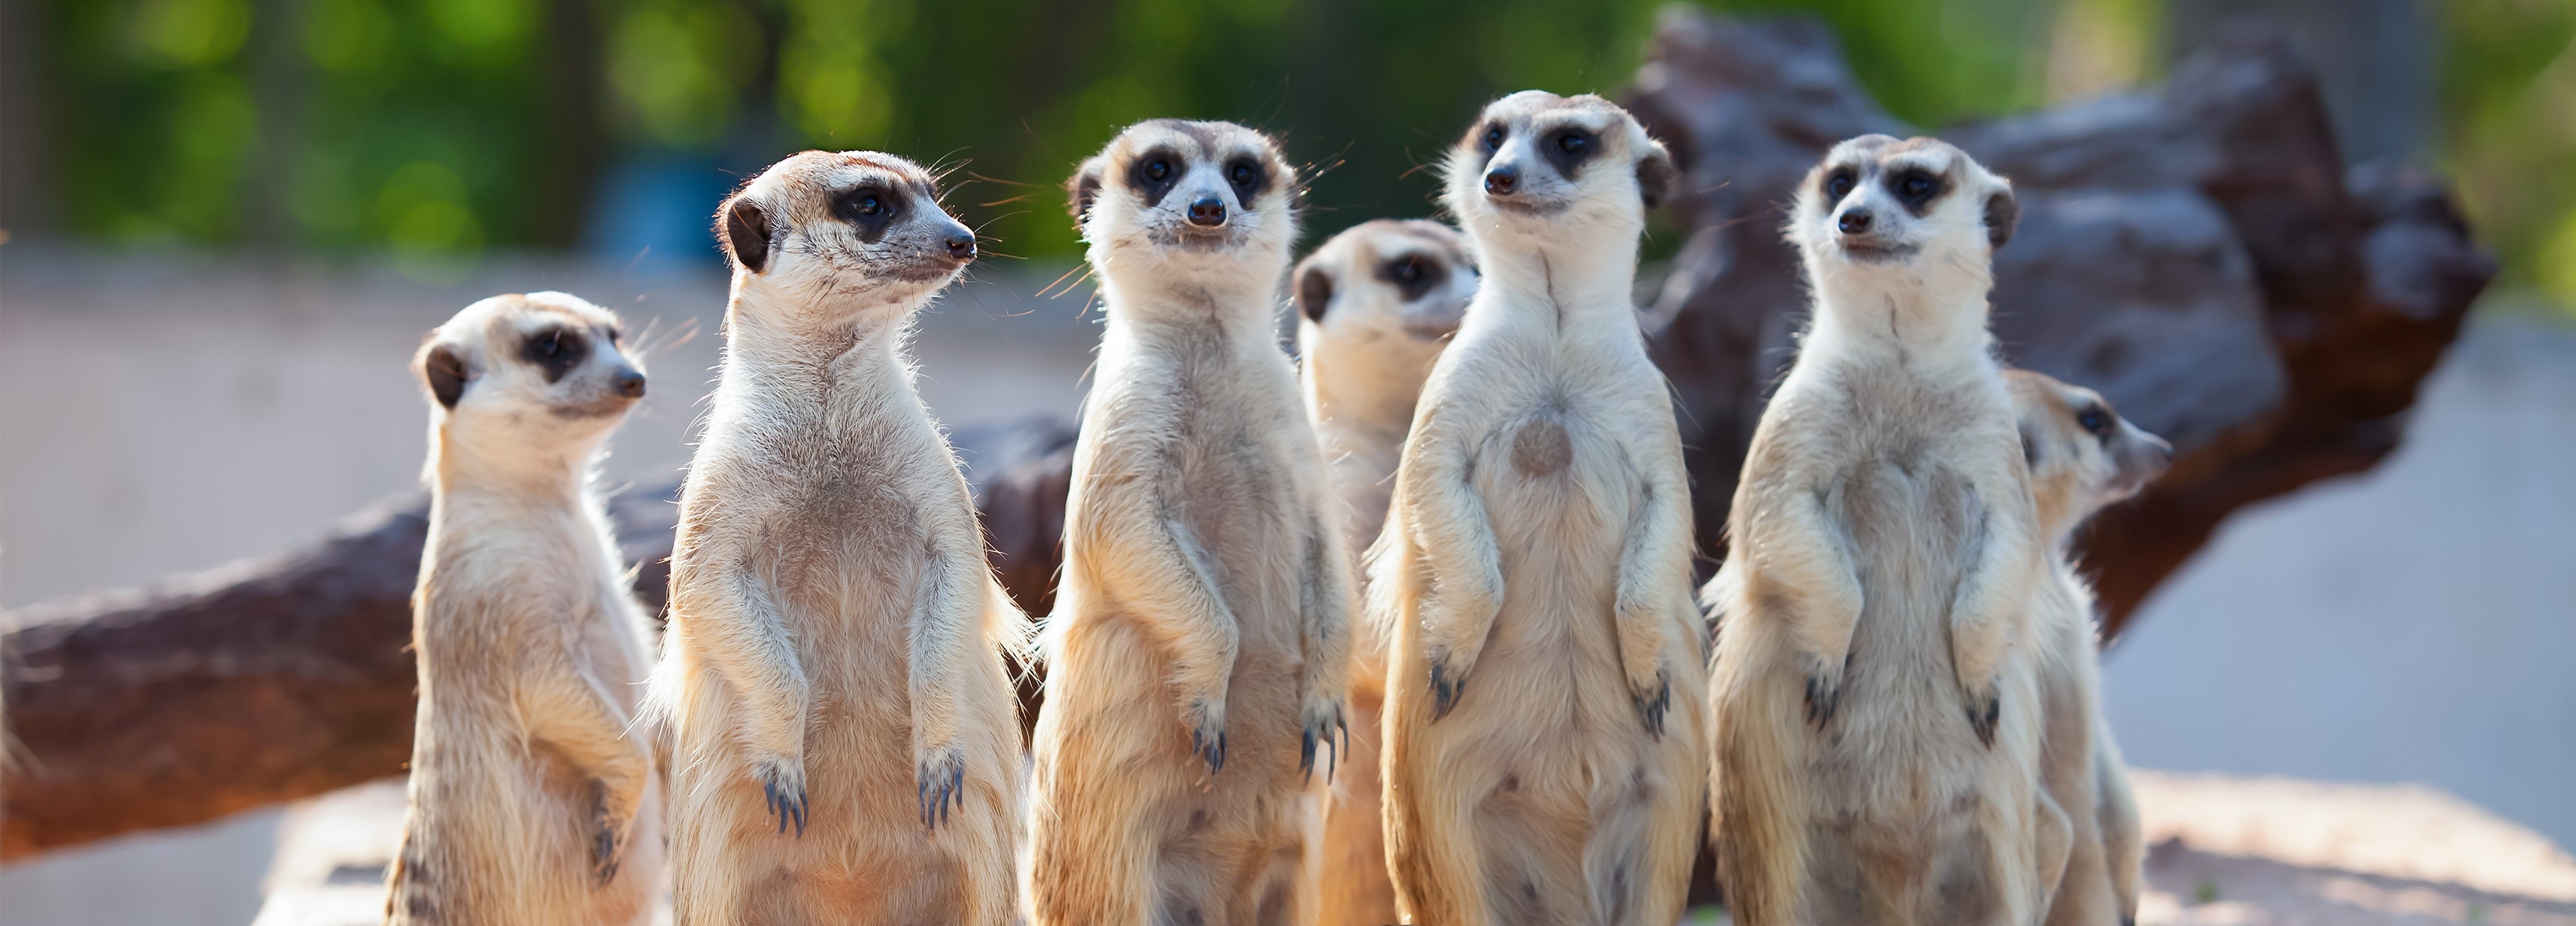 Meerkats: they're just like us! | BBC Earth